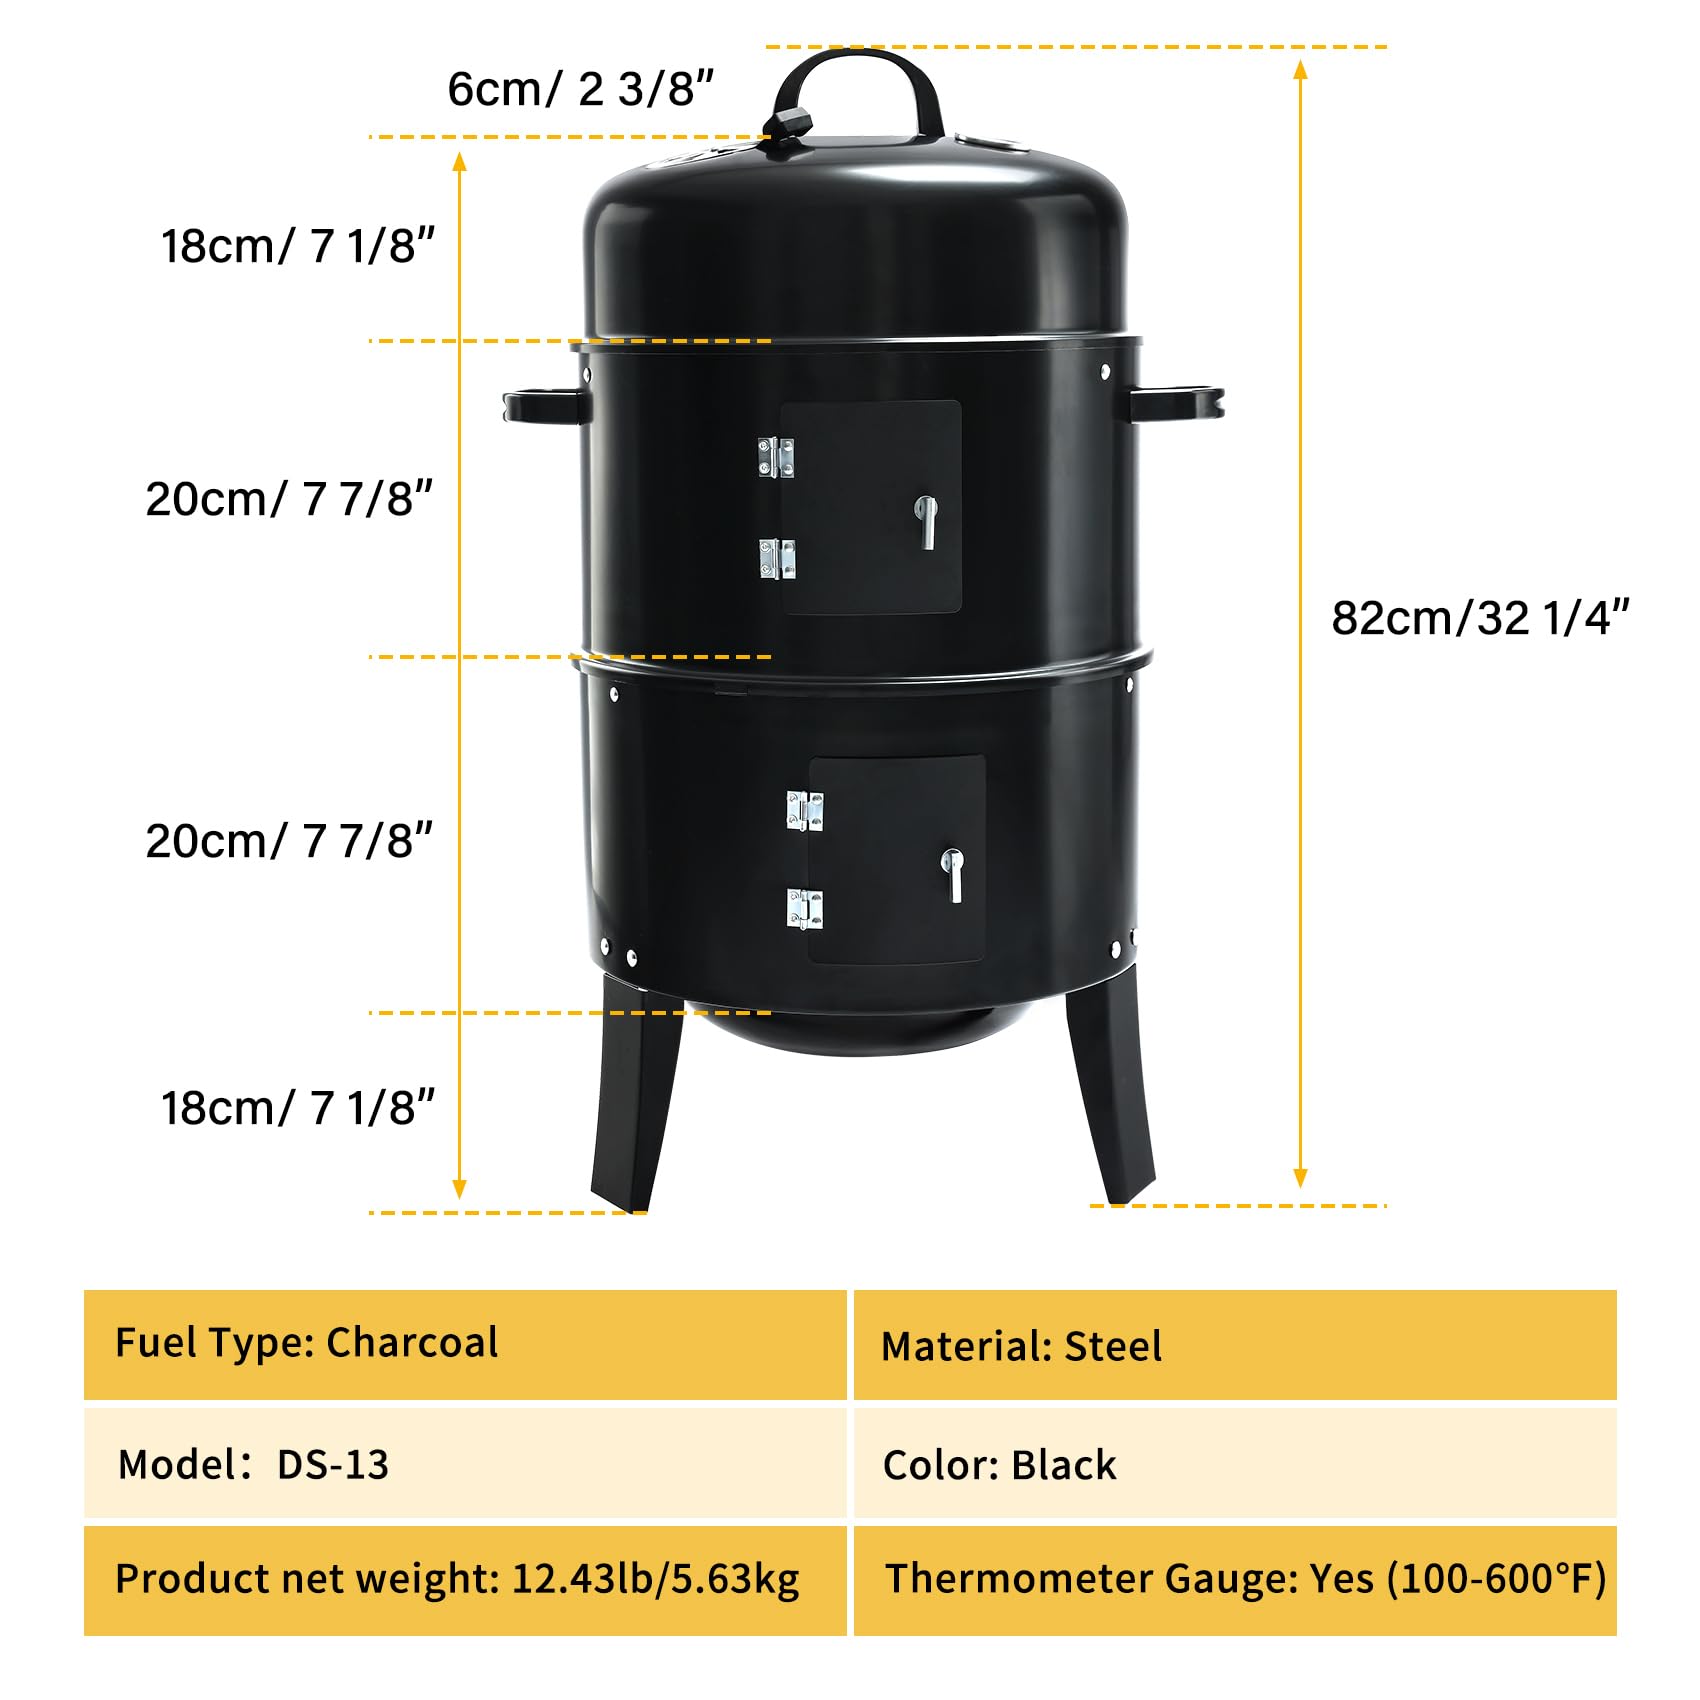 TENGCHANG 32" Charcoal Smoker BBQ Grill, 3IN1 Outdoor Vertical Smoke Portable Meat Cooker, Black